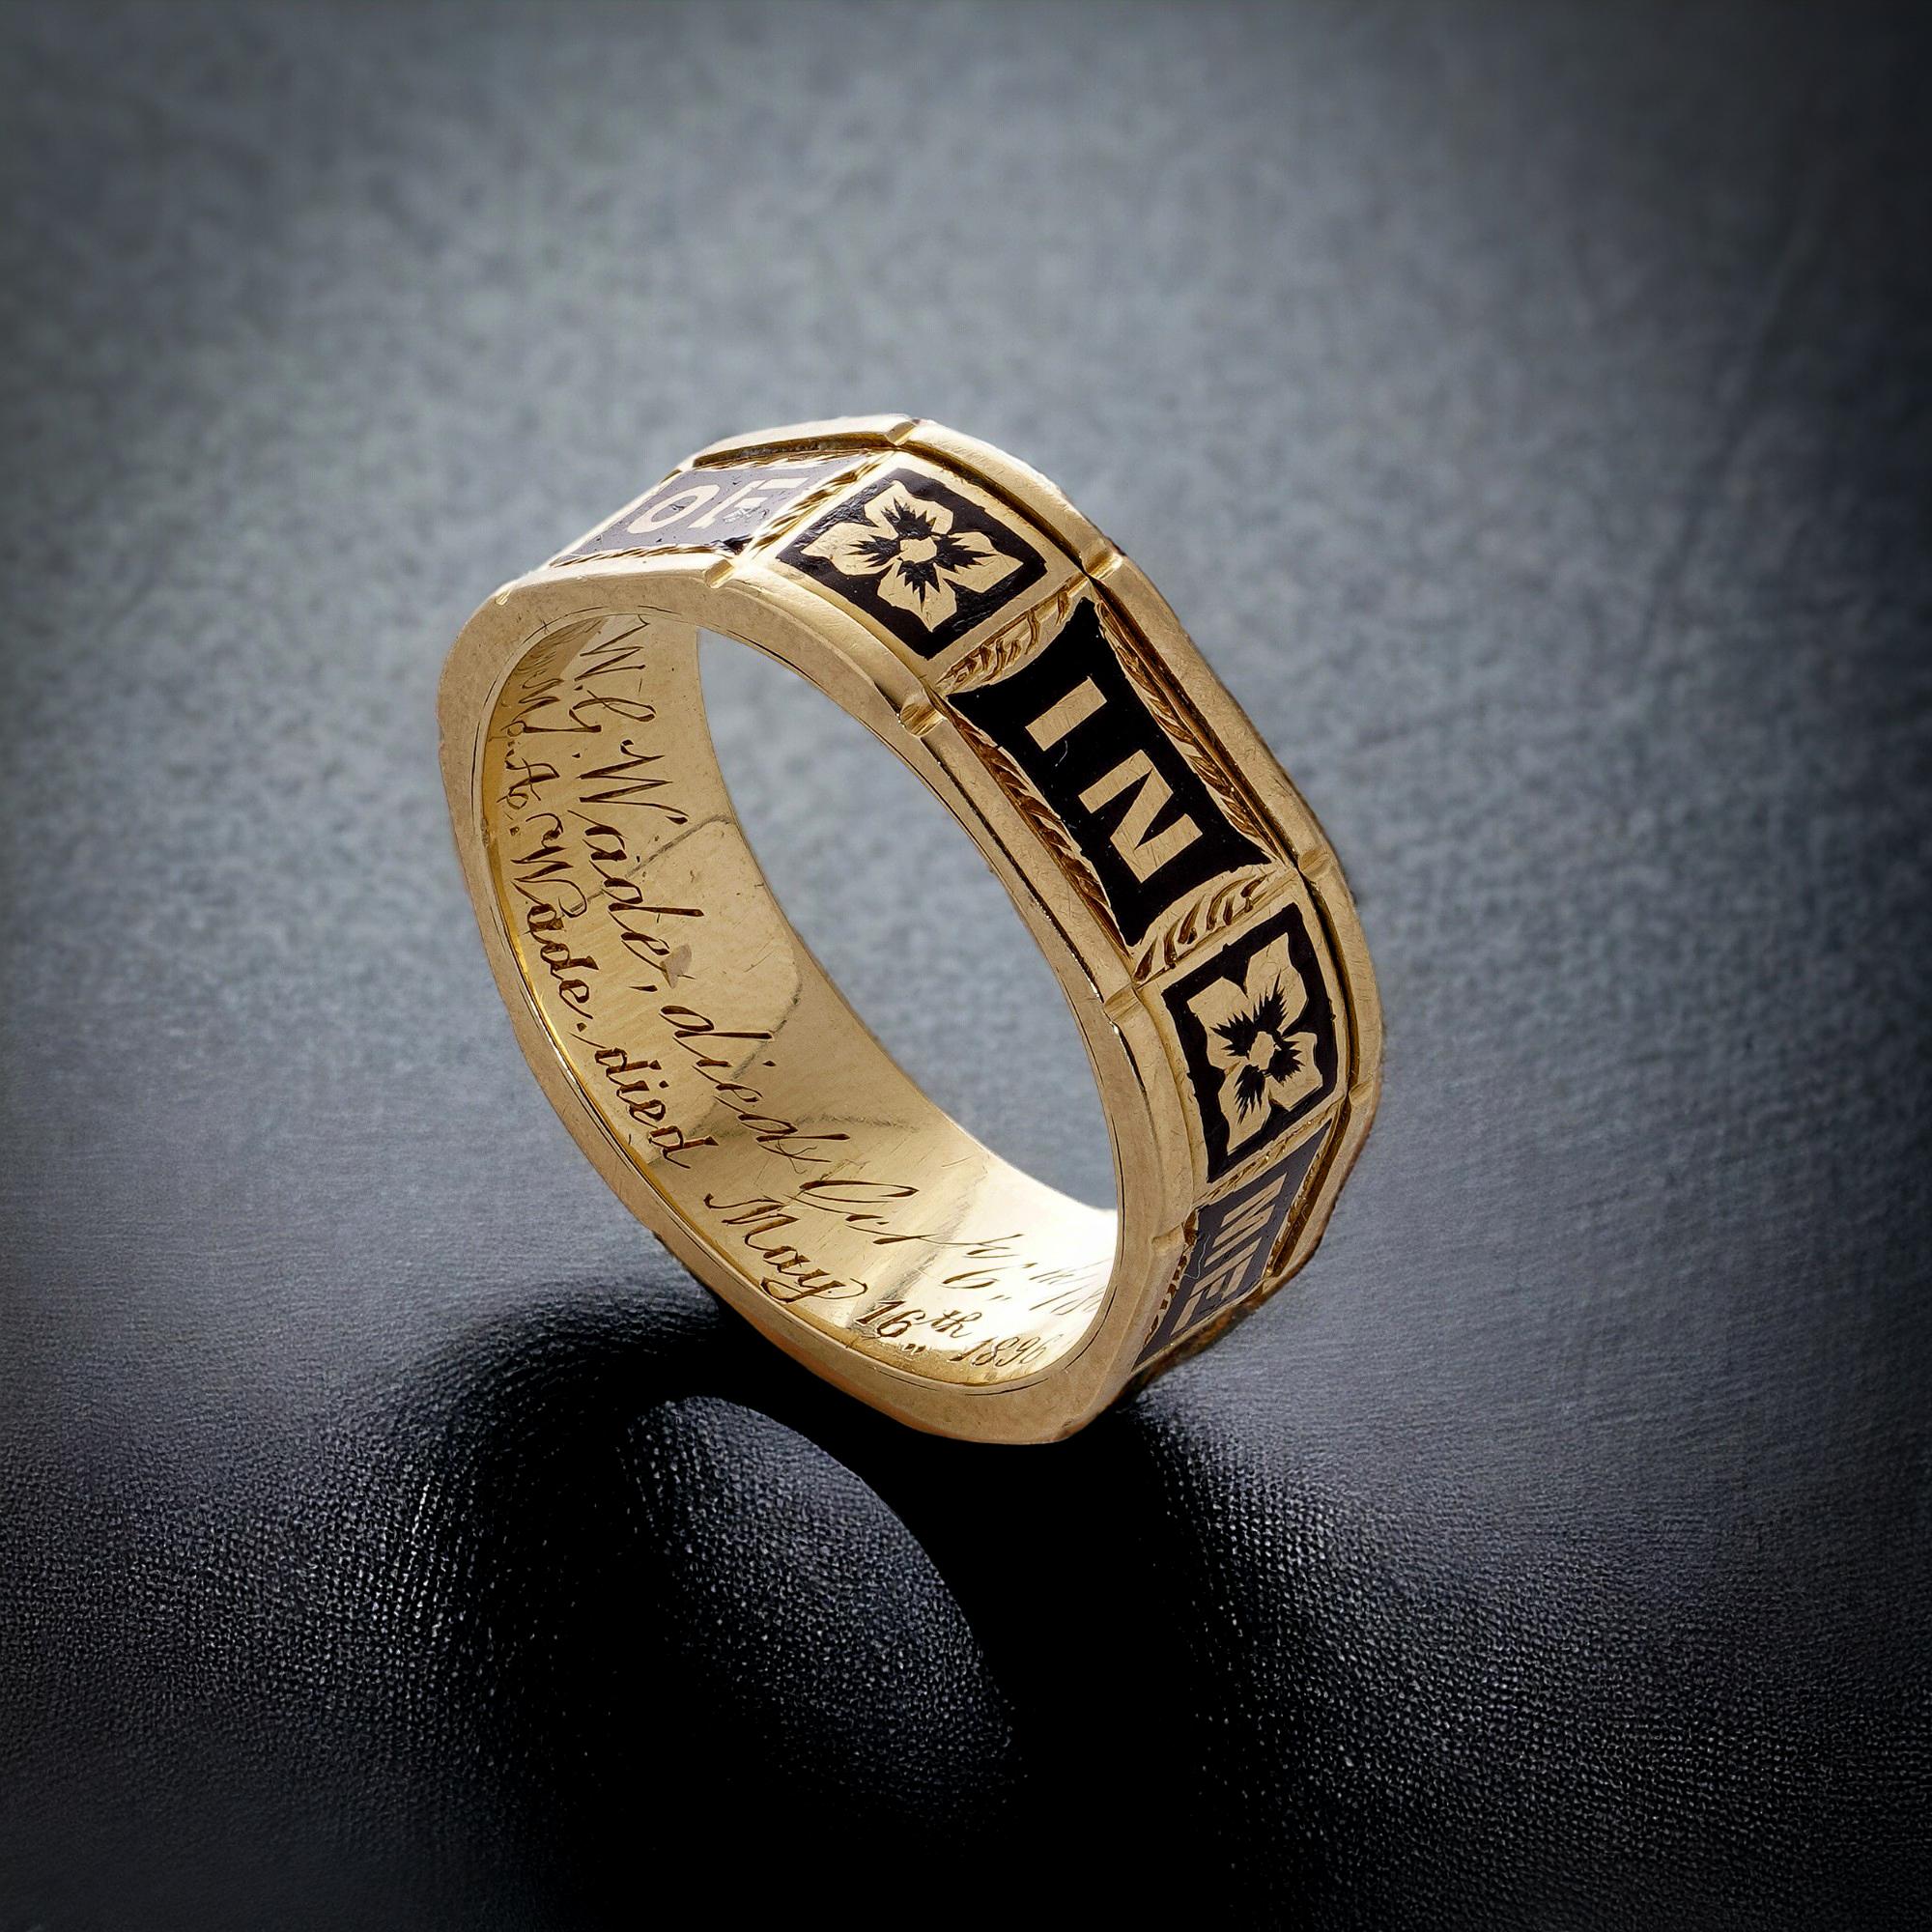 This mourning ring is an antique Victorian piece crafted from 18kt yellow gold, featuring intricate black enamel detailing. Encircling the band are the words 